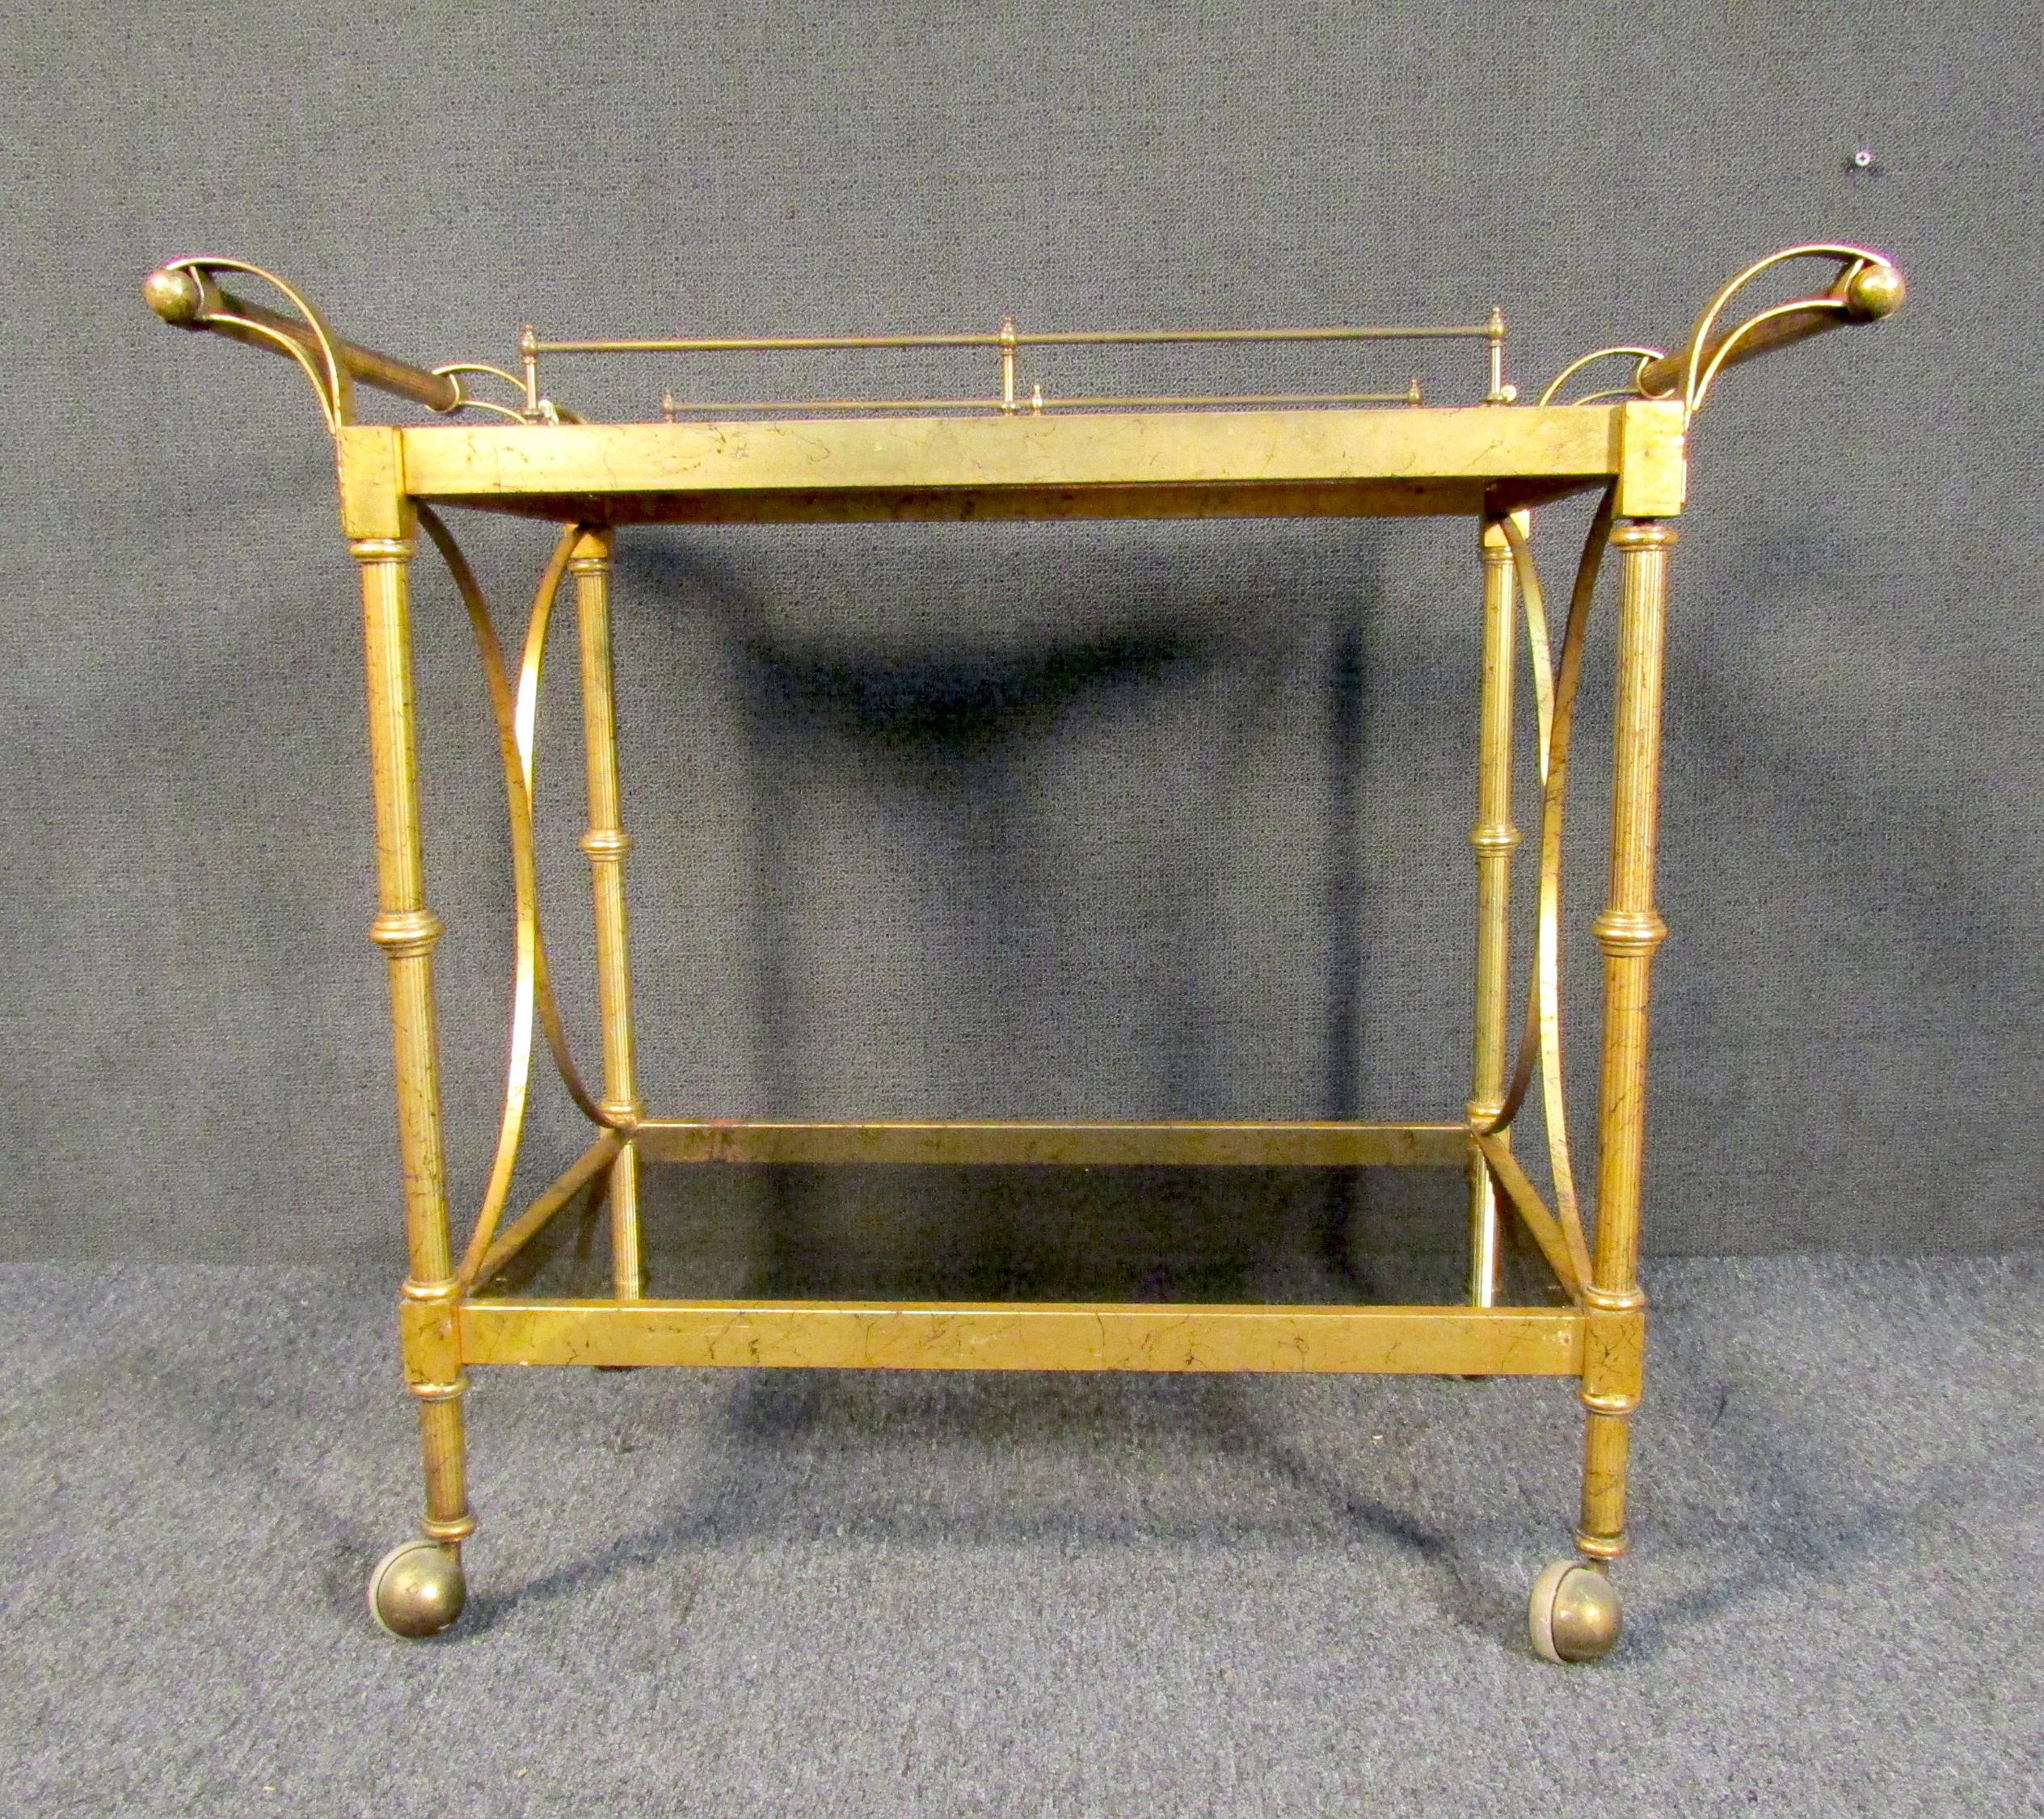 Mid-century modern bar cart in a brass finish. The cart comes with a wooden serving tray that lifts from the top to use for serving guests.

Please confirm the item location with the dealer. (NJ/NY).